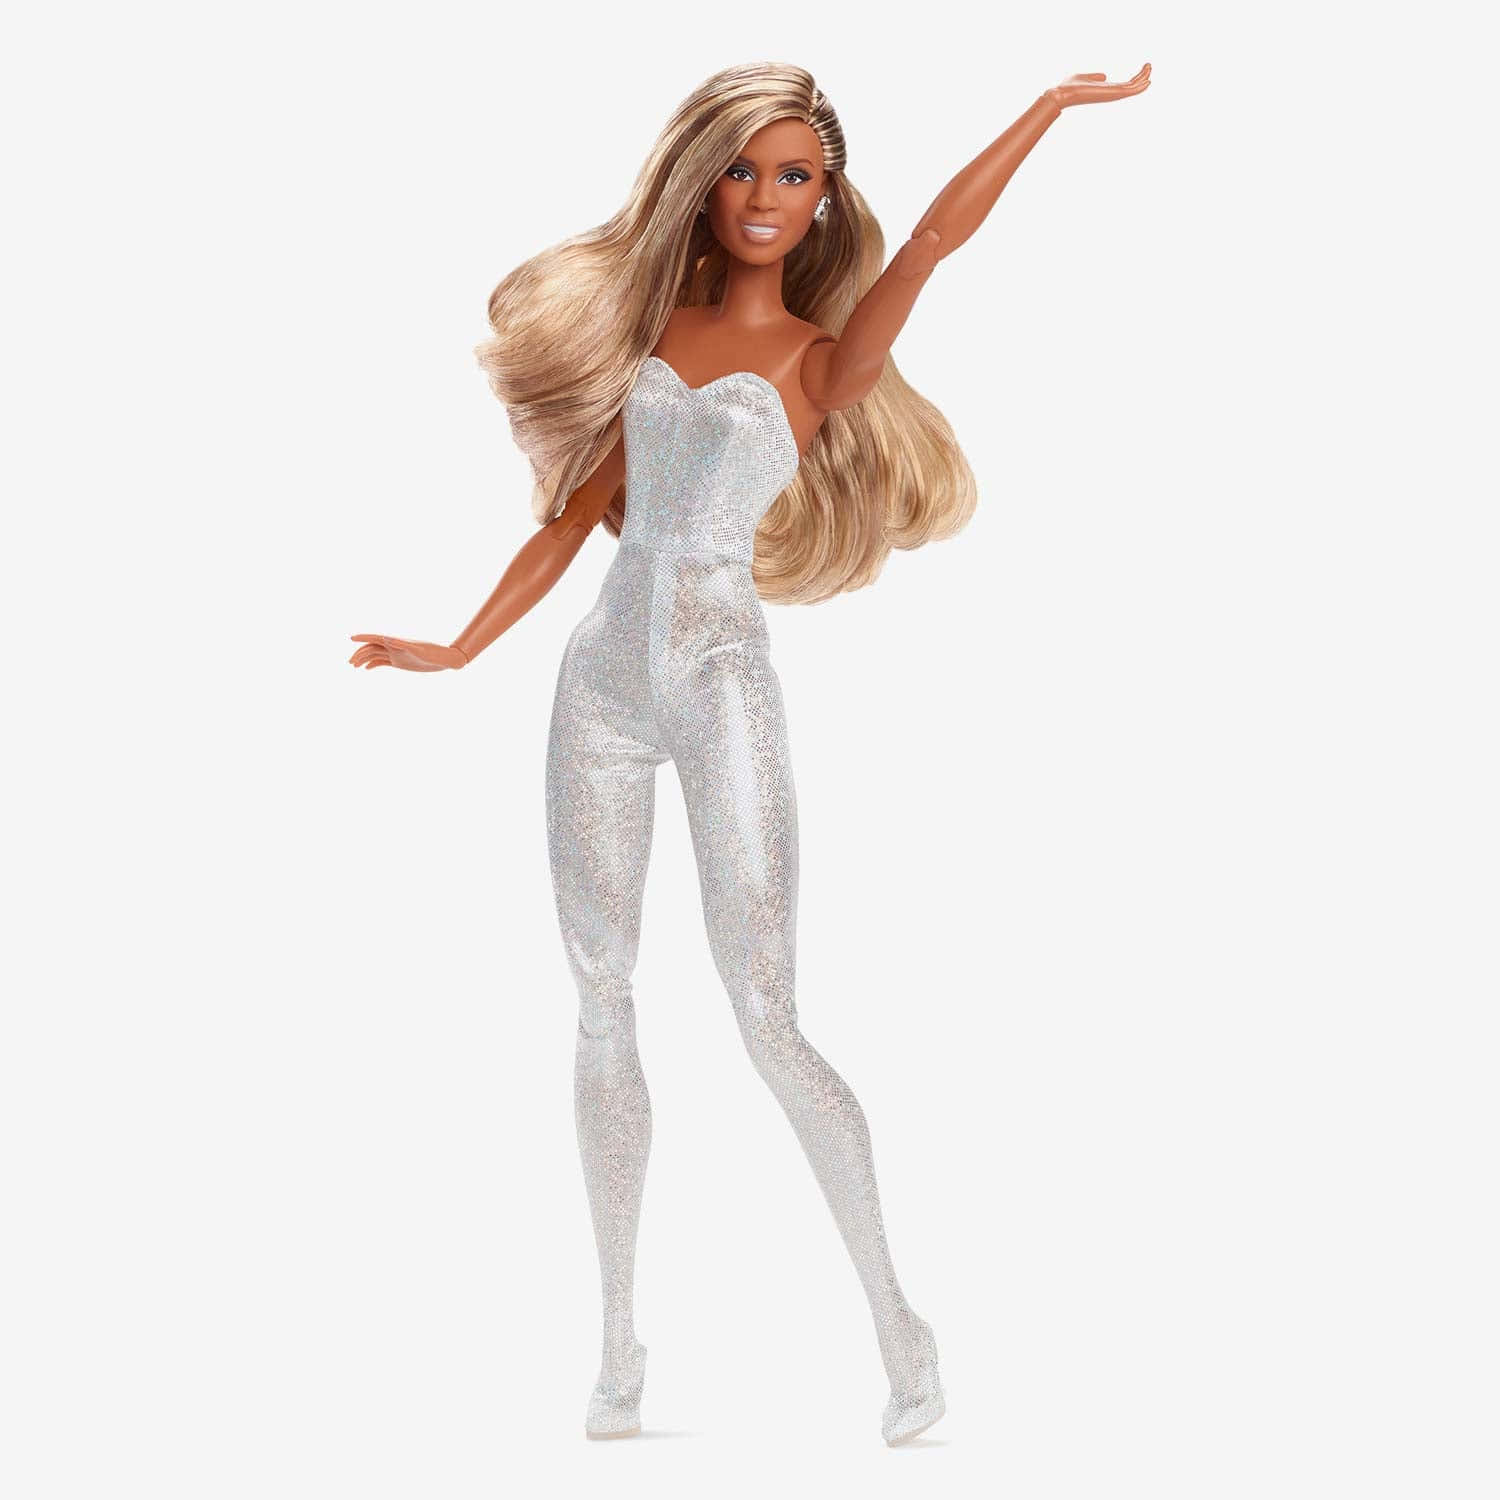 Barbie Doll In Silver Outfit